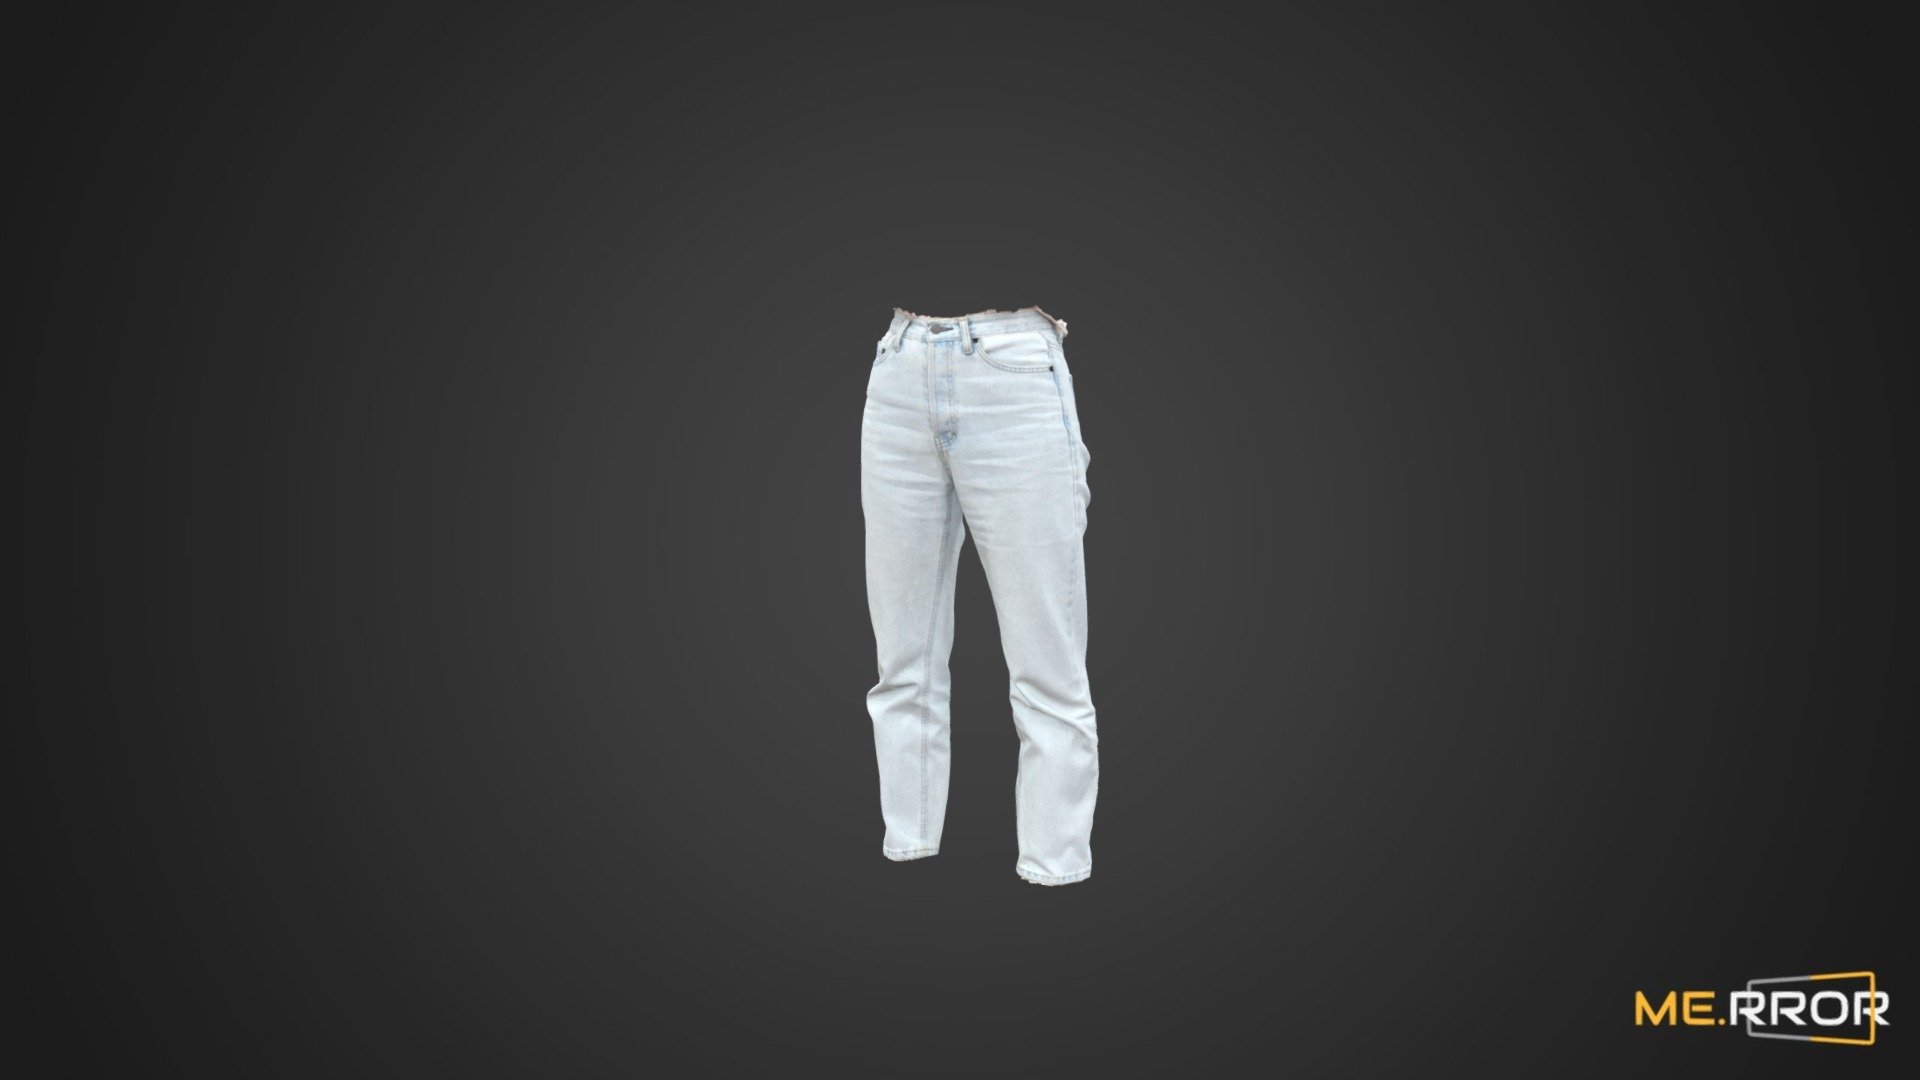 MERROR is a 3D Content PLATFORM which introduces various Asian assets to the 3D world


3DScanning #Photogrametry #ME.RROR - Skyblue Jeans 2 - Buy Royalty Free 3D model by ME.RROR (@merror) 3d model